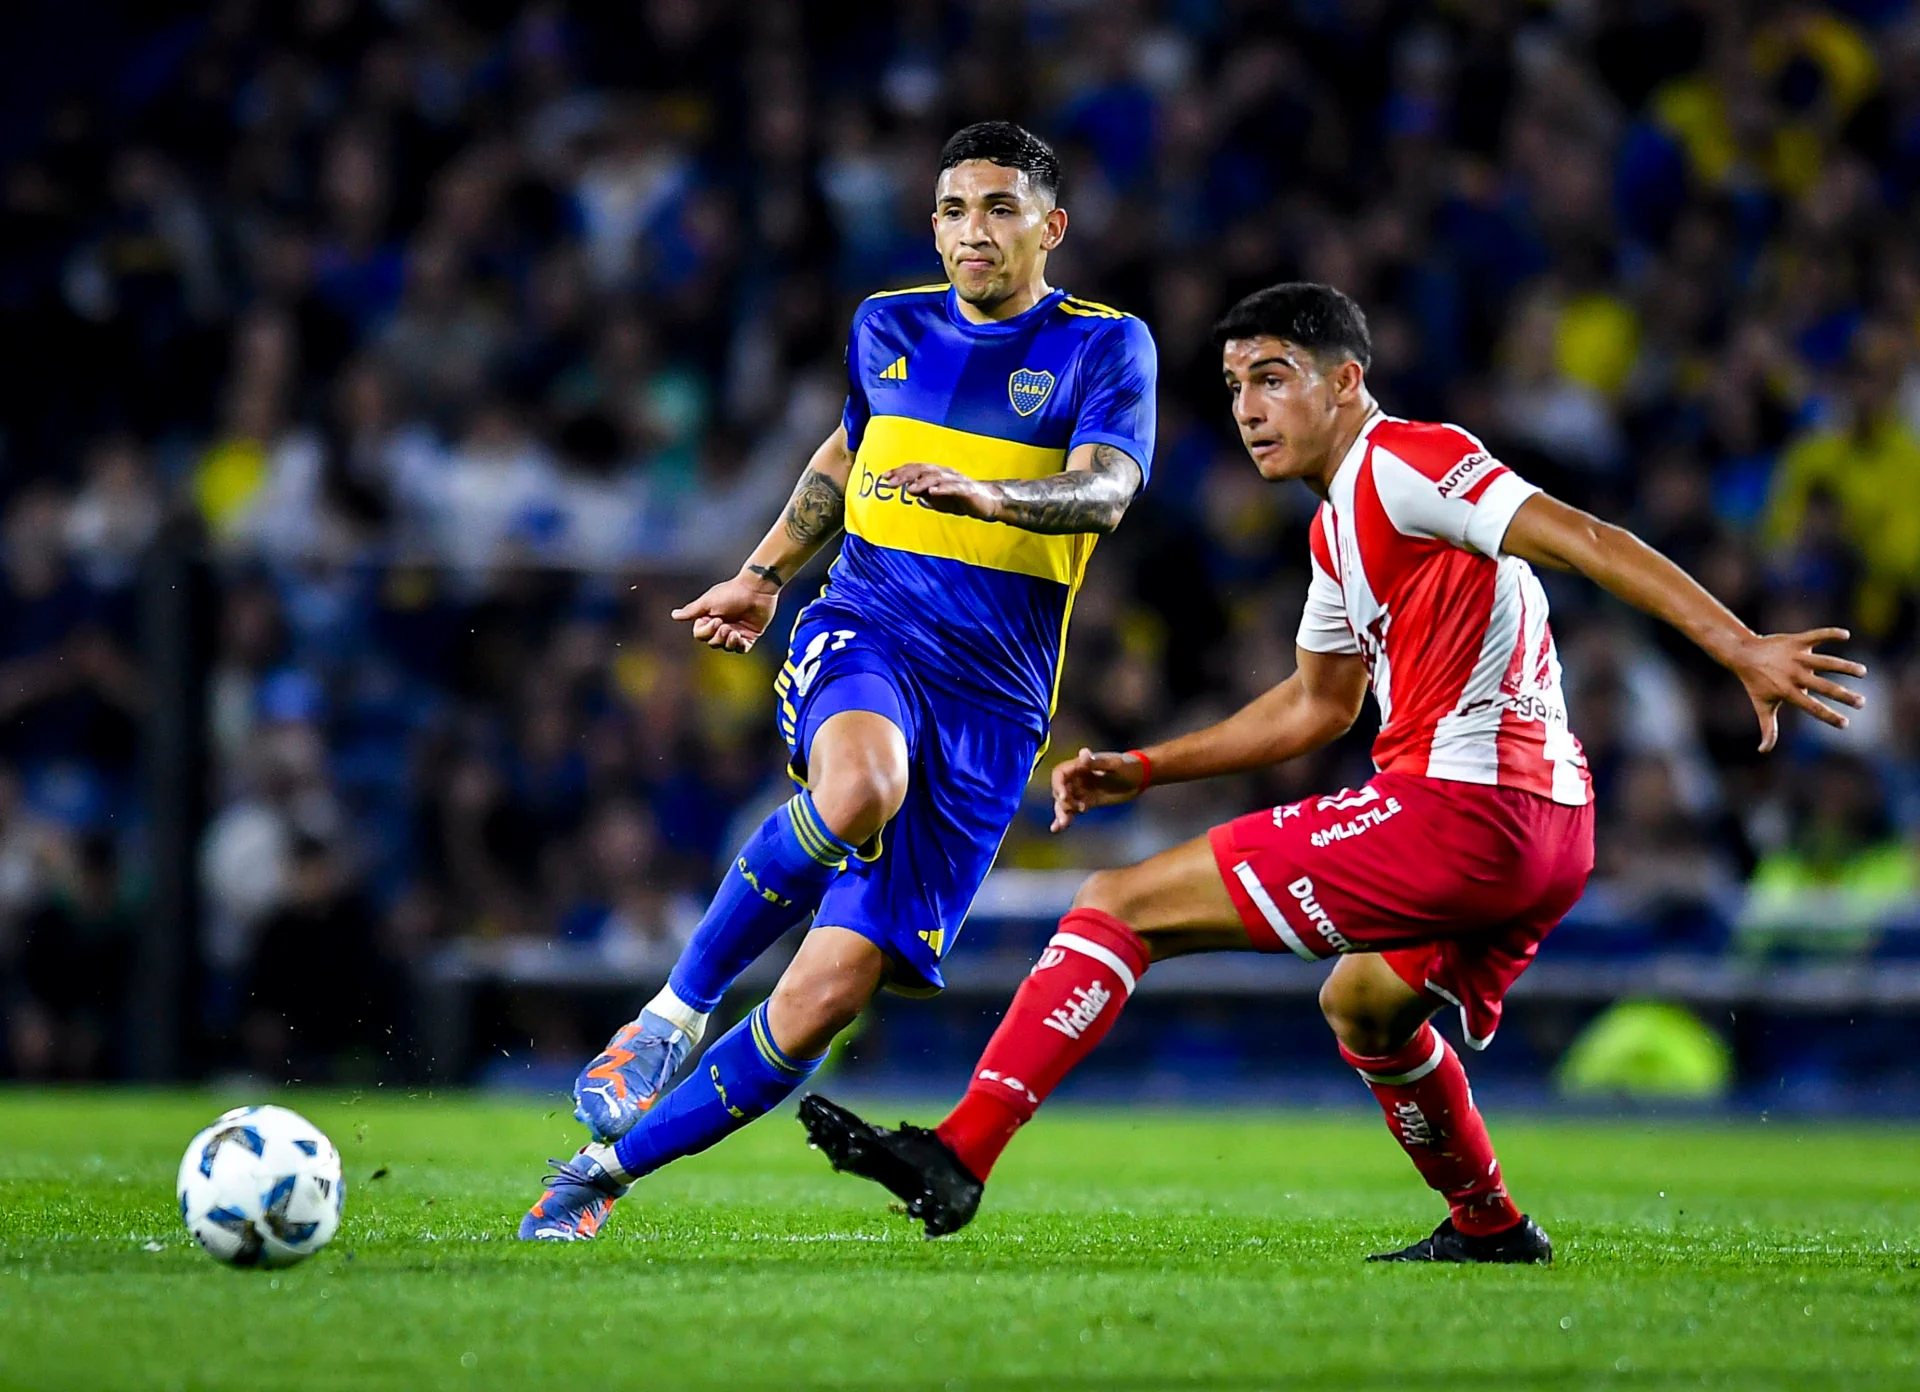 Fiorentina and Milan have received strong reports from their scouts about Boca Juniors midfielder Ezequiel Fernandez. The Viola could be particularly keen.